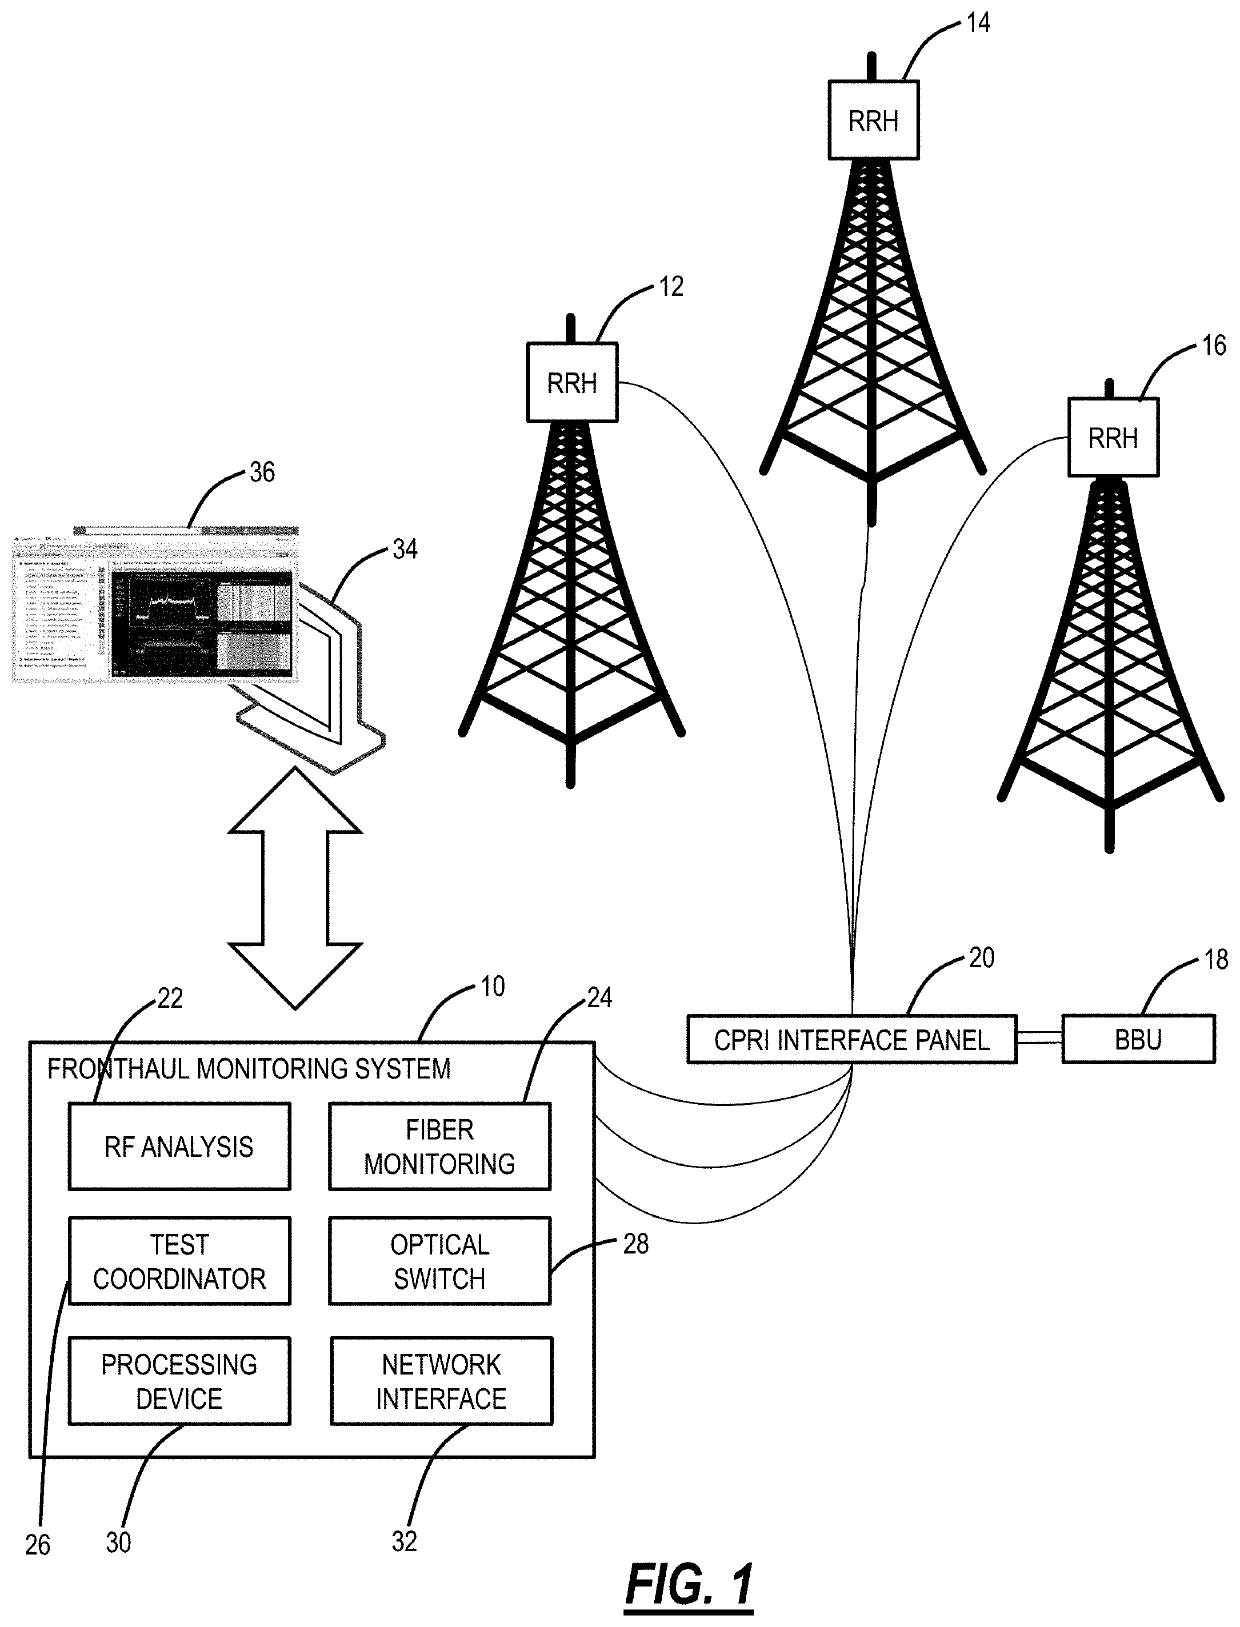 Fronthaul remote access and monitoring systems and methods to test fiber optic infrastructure and RF spectrum